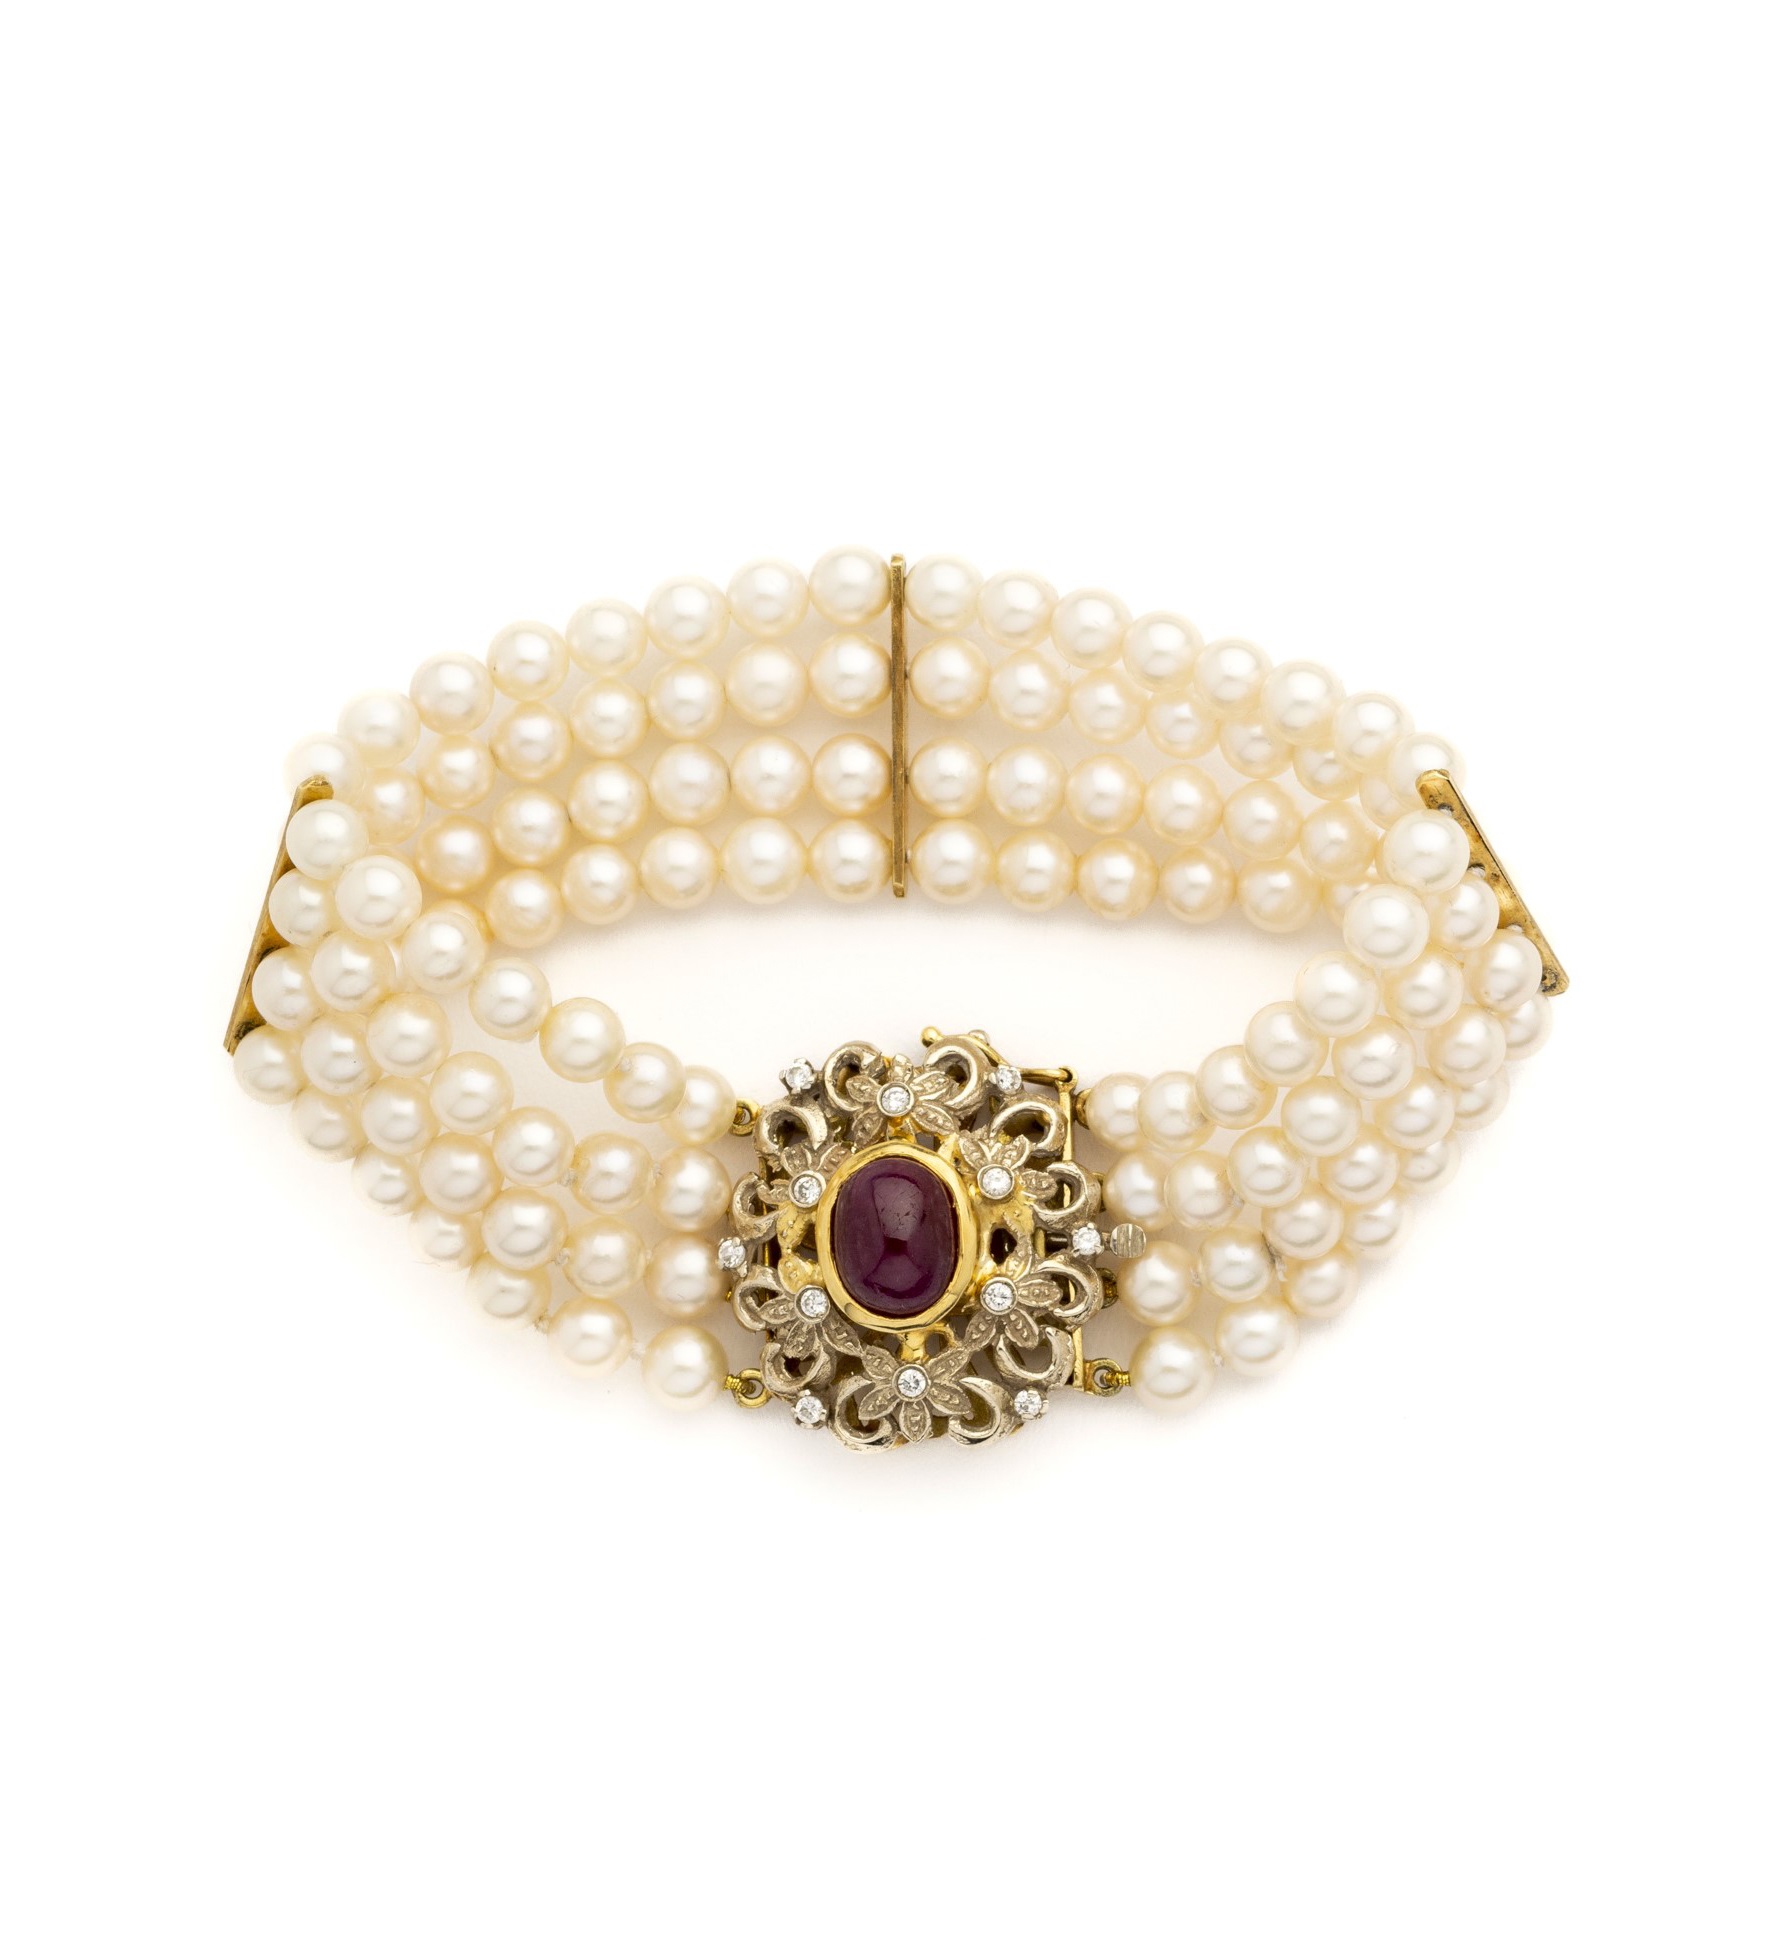 CULTURED PEARL, RUBY AND DIAMOND BRACELET